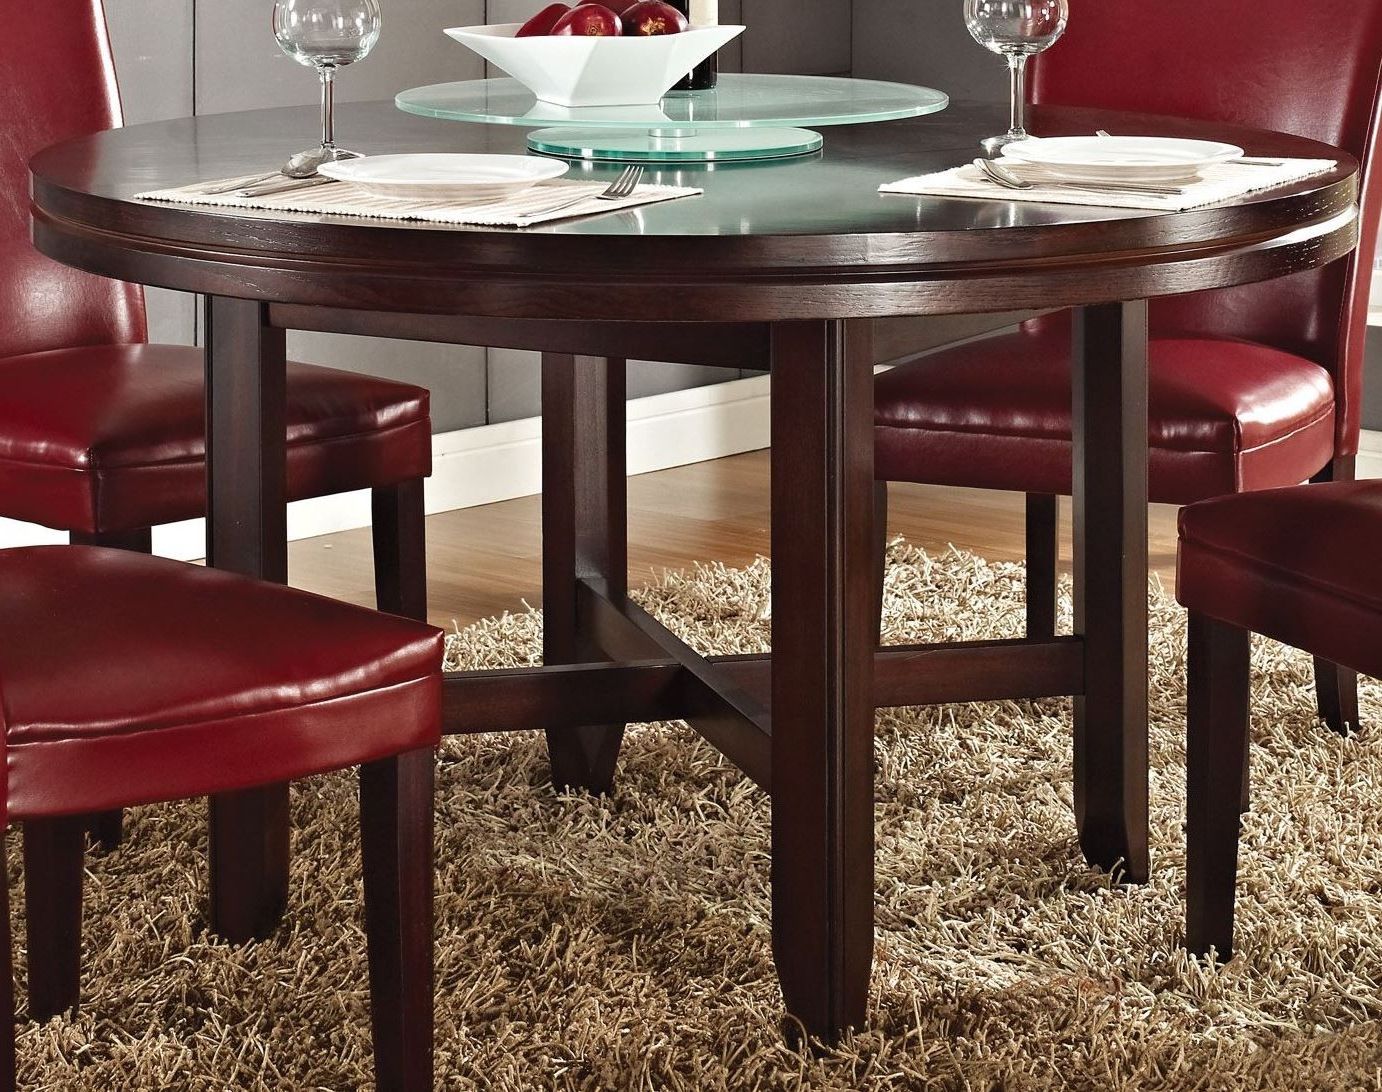 Dark Oak Wood Dining Tables Throughout Popular Hartford Dark Oak 52" Round Dining Table From Steve Silver (View 1 of 20)